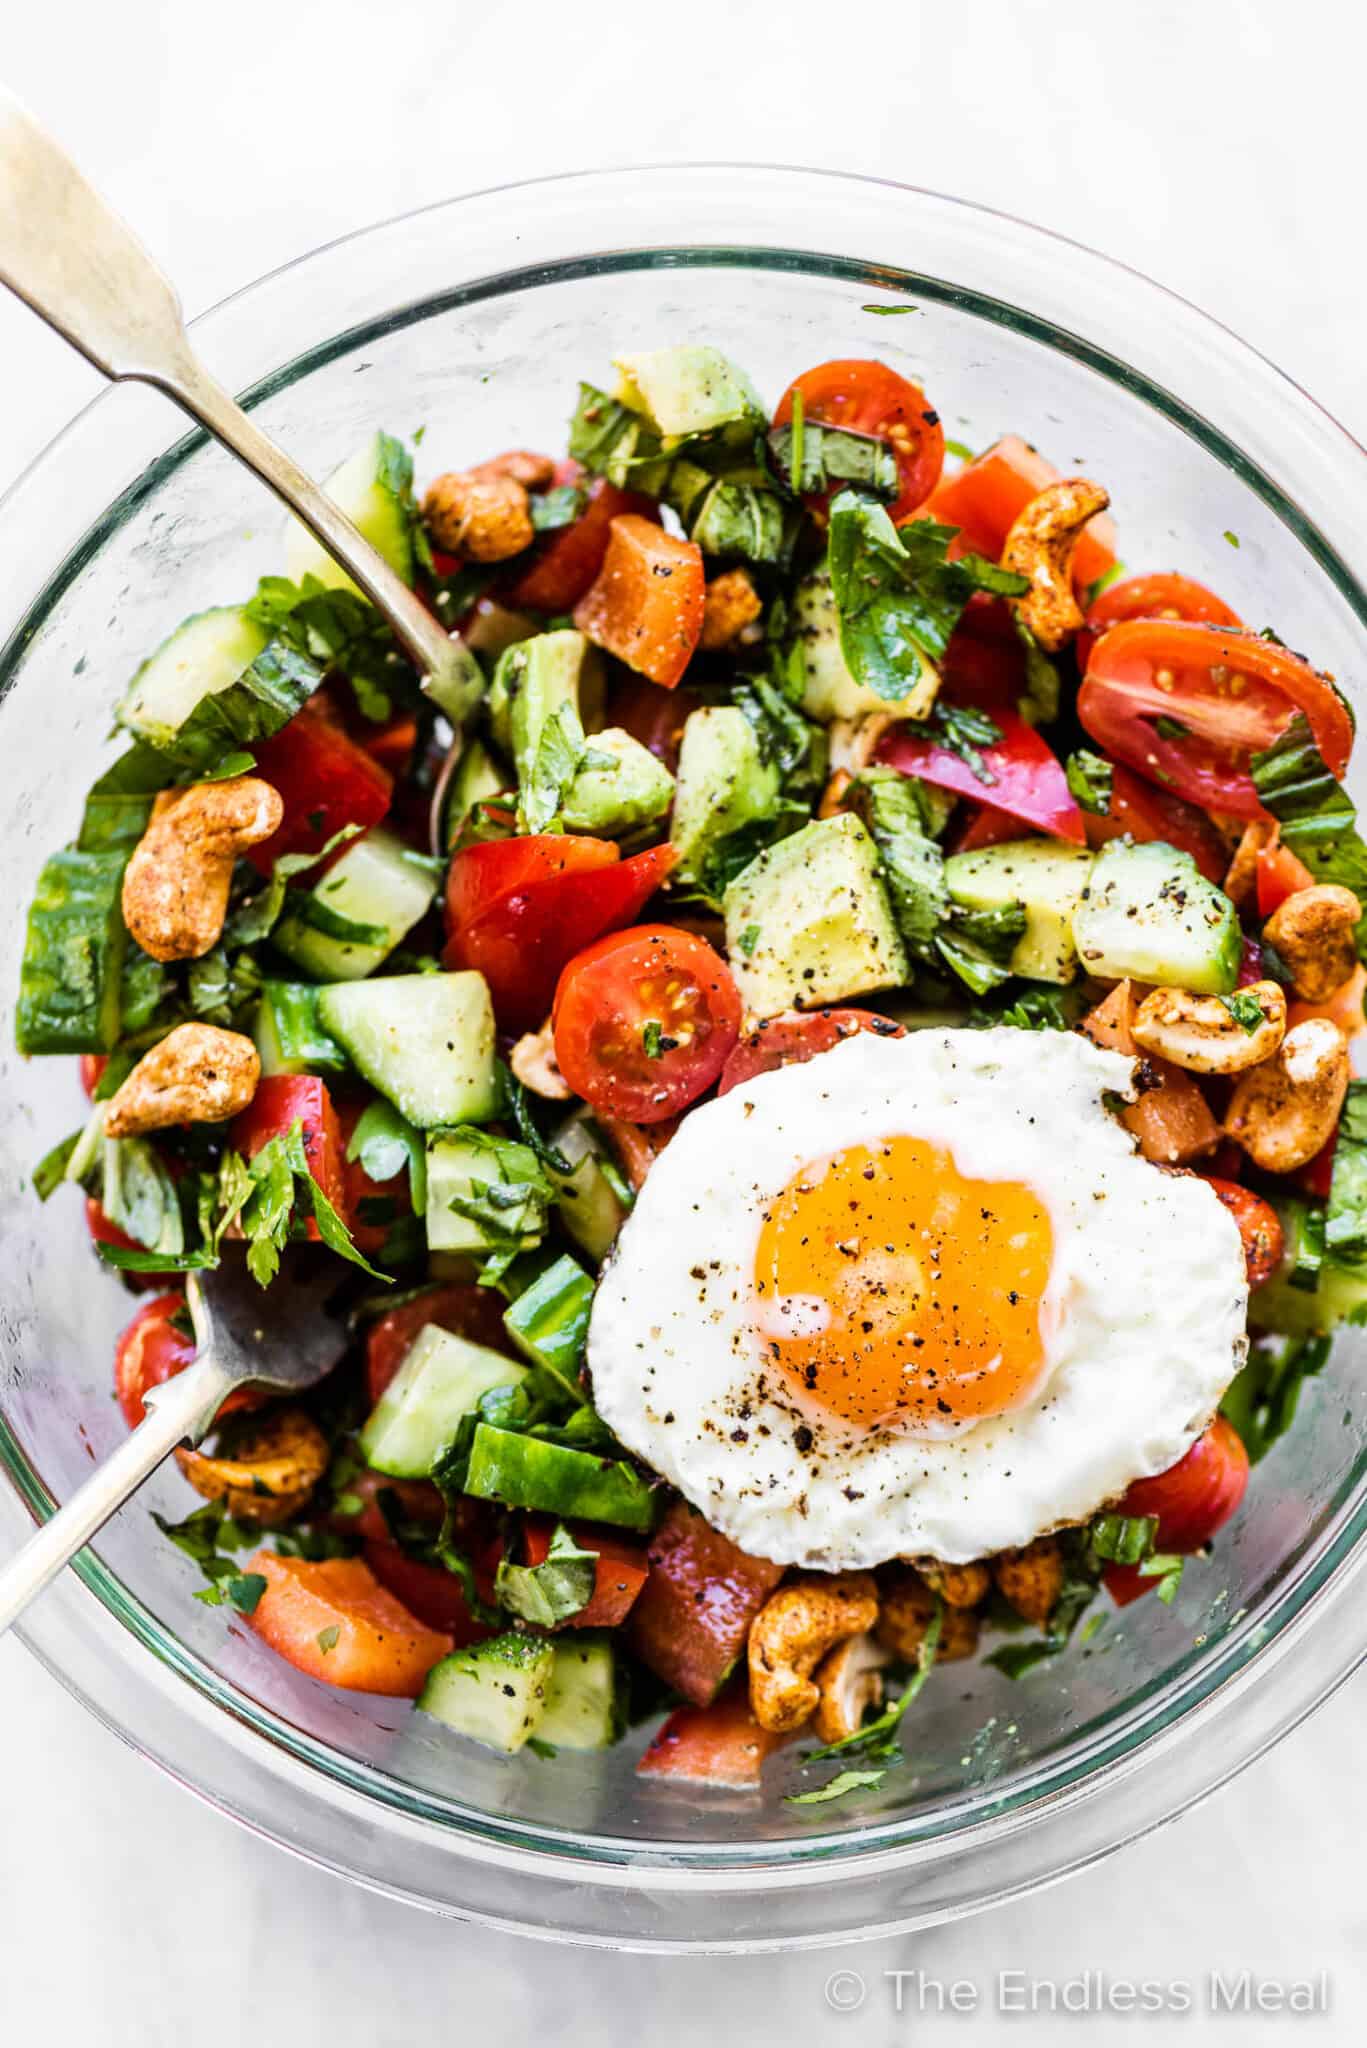 Healthy breakfast salad in a glass mixing bowl with an egg on top.